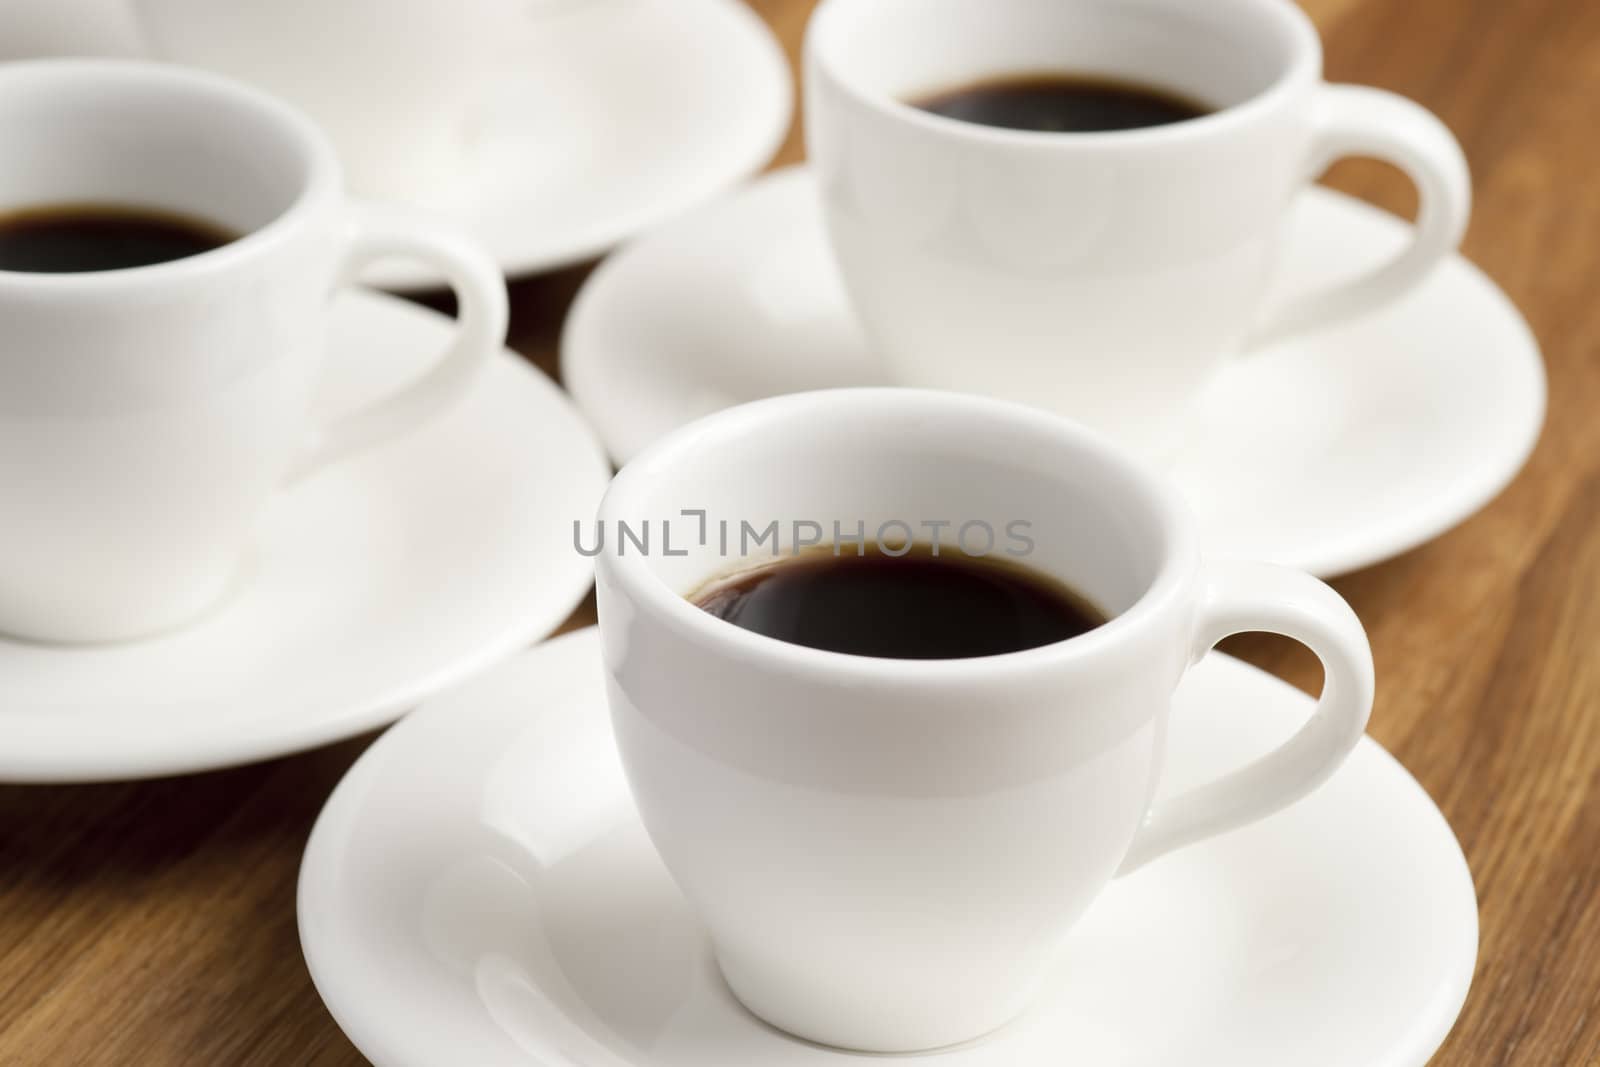 Group of espresso coffee cups.